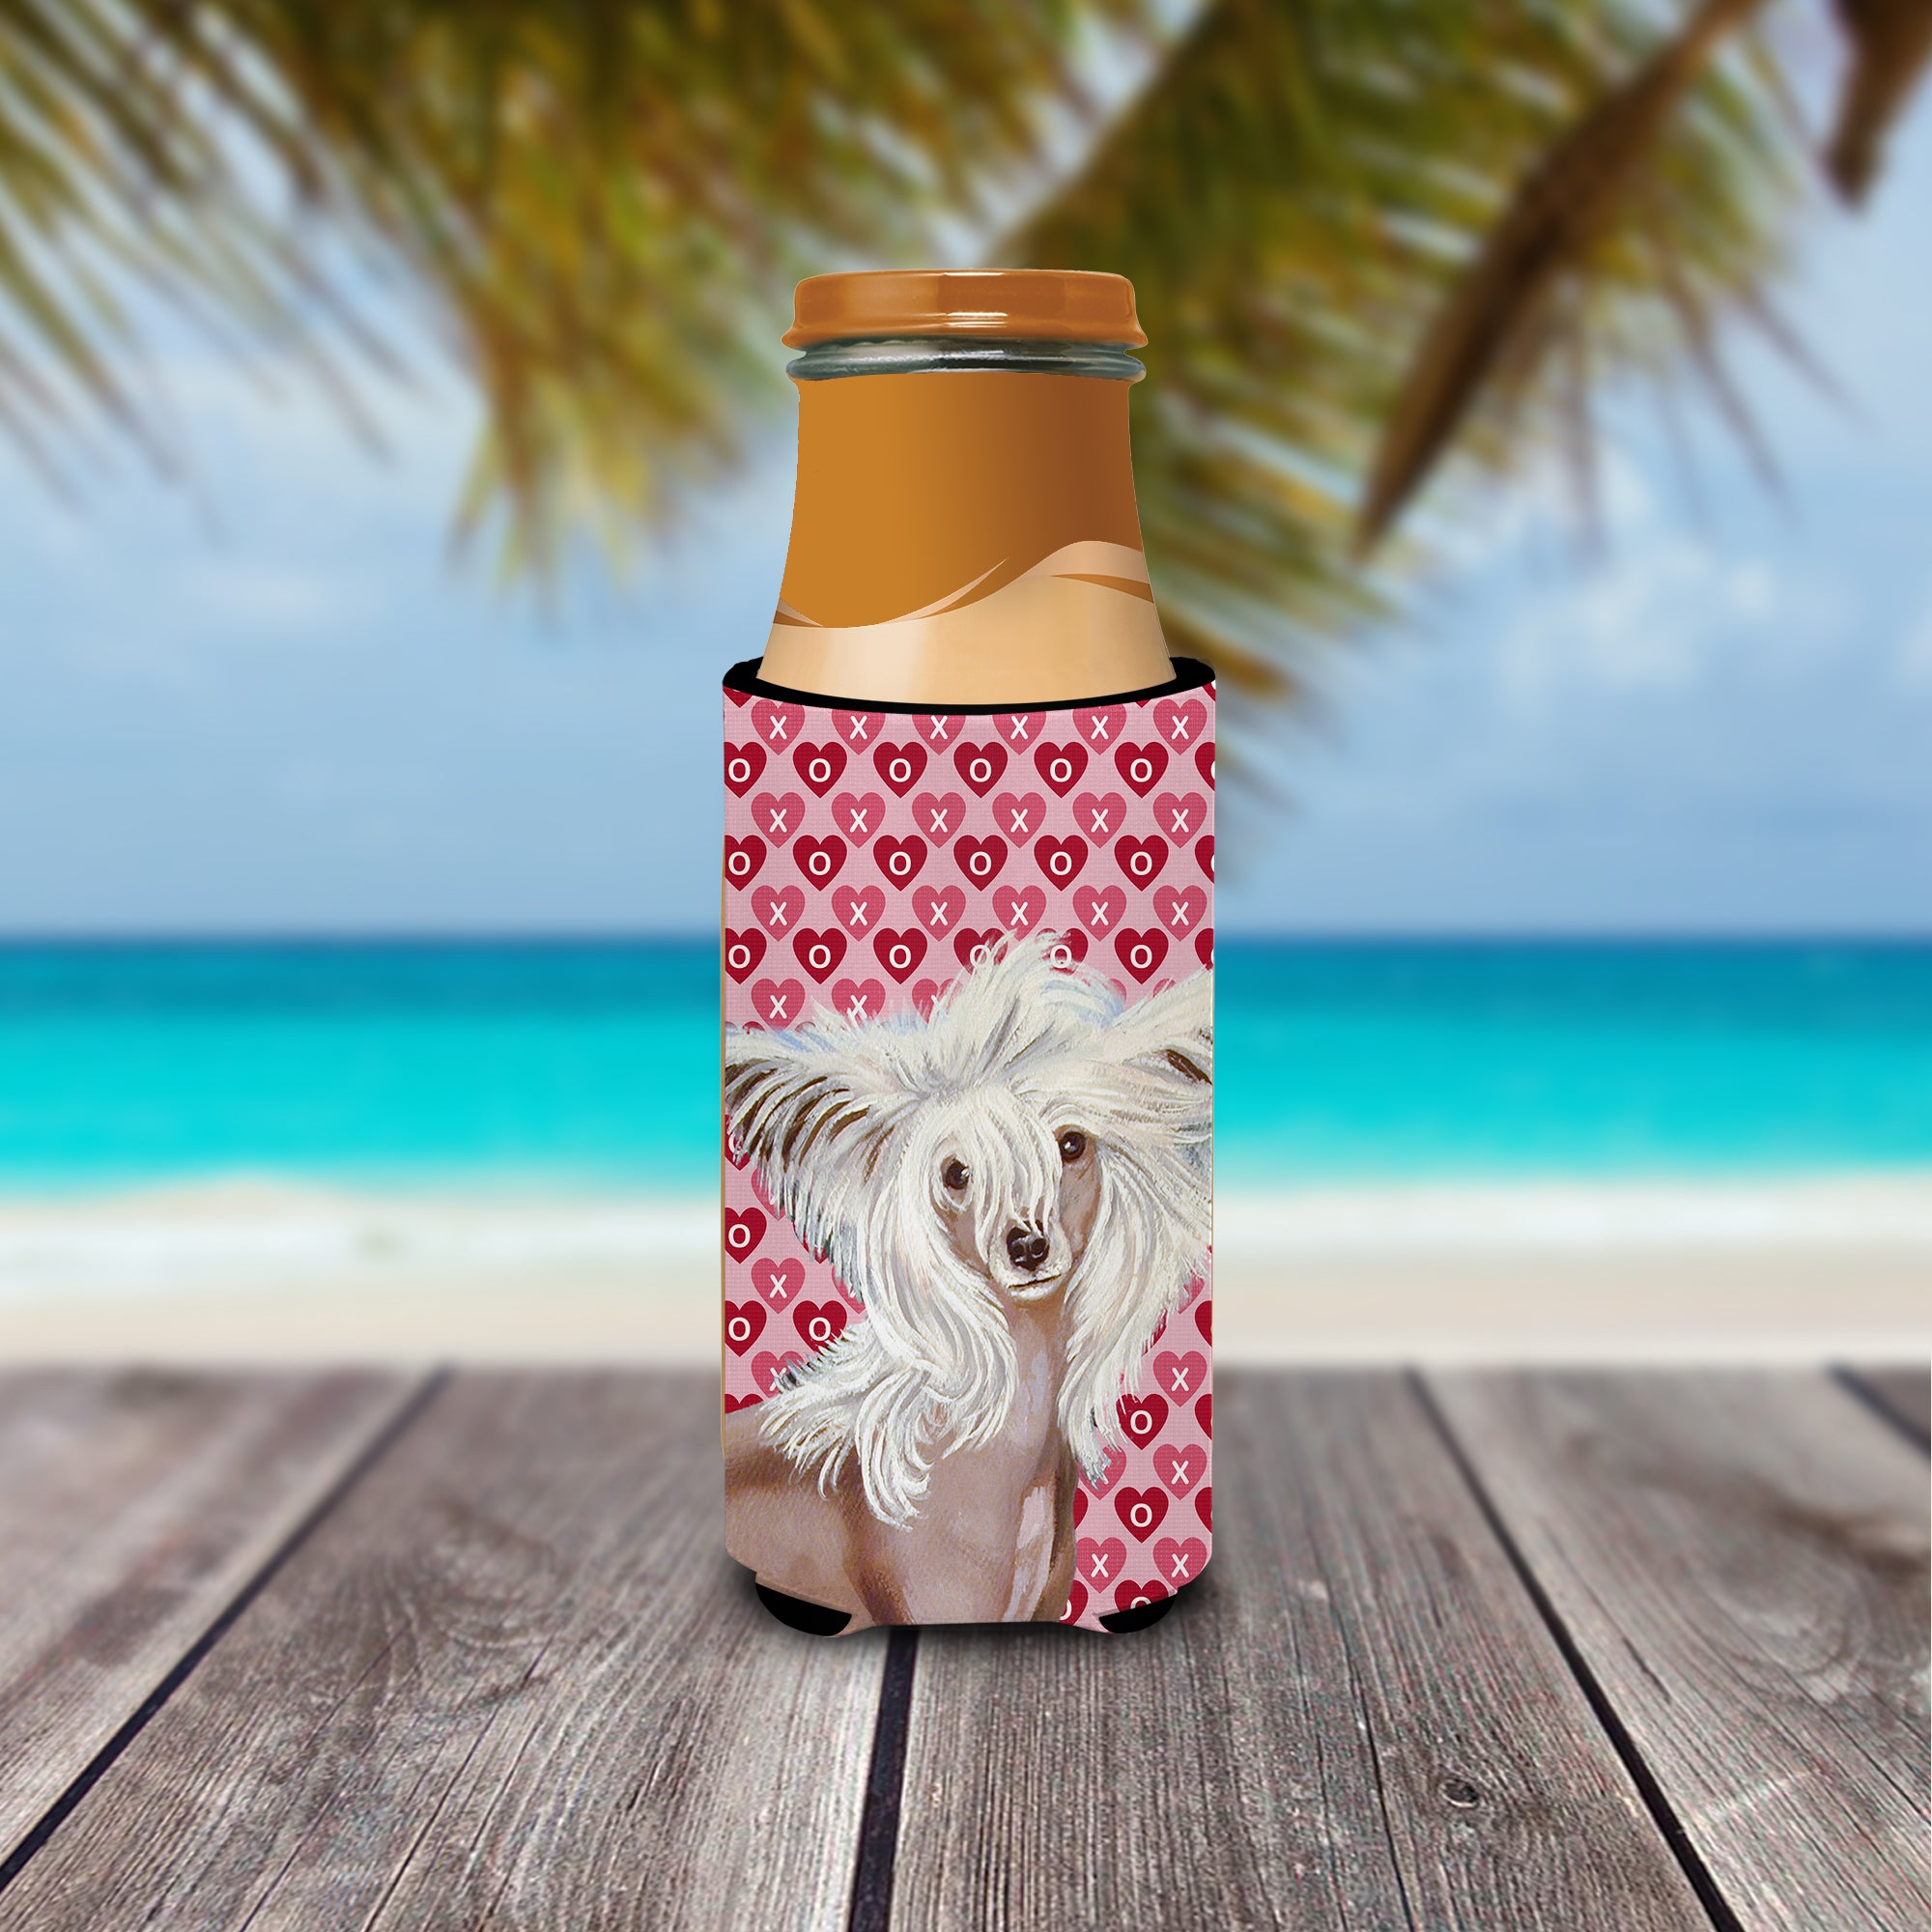 Chinese Crested Hearts Love and Valentine's Day Portrait Ultra Beverage Insulators for slim cans LH9167MUK